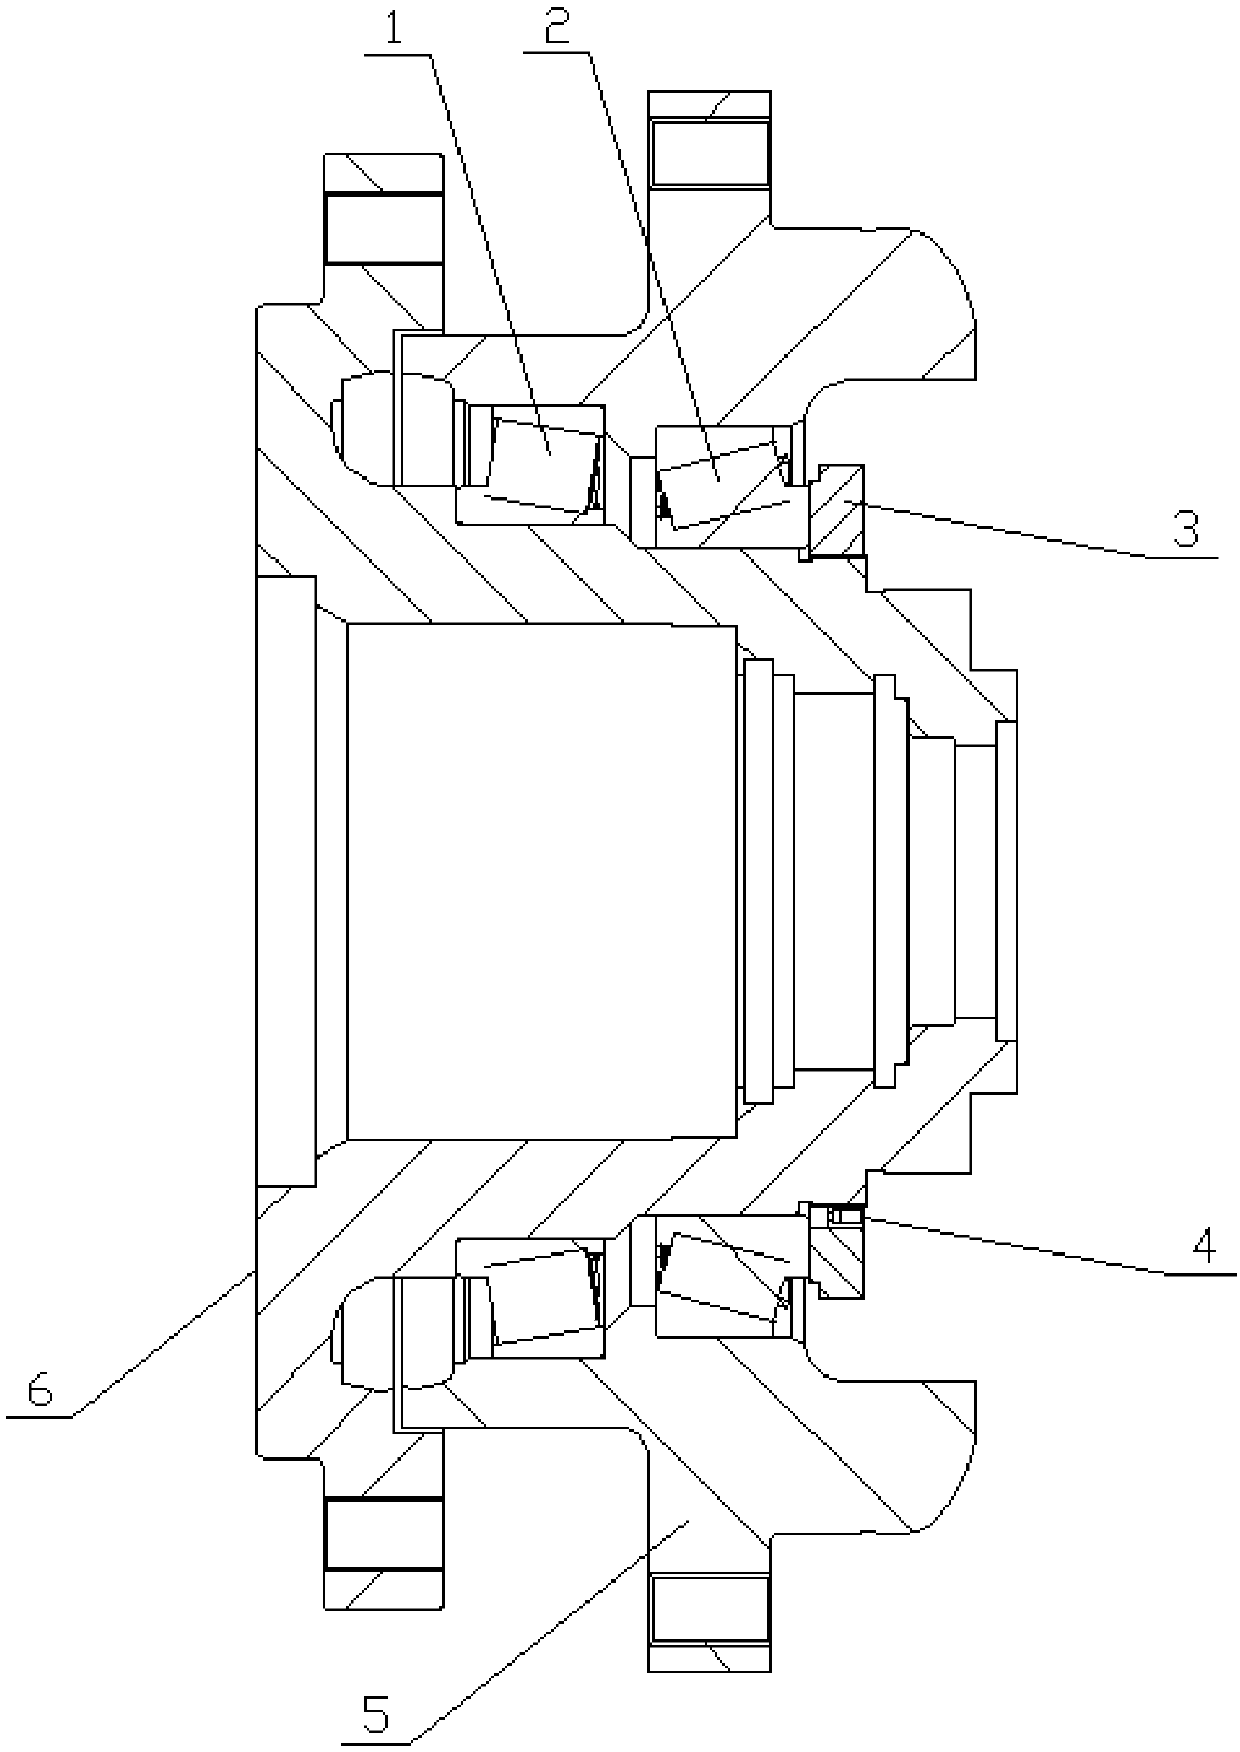 Structure for improving thread bearing capacity by deformation compensation